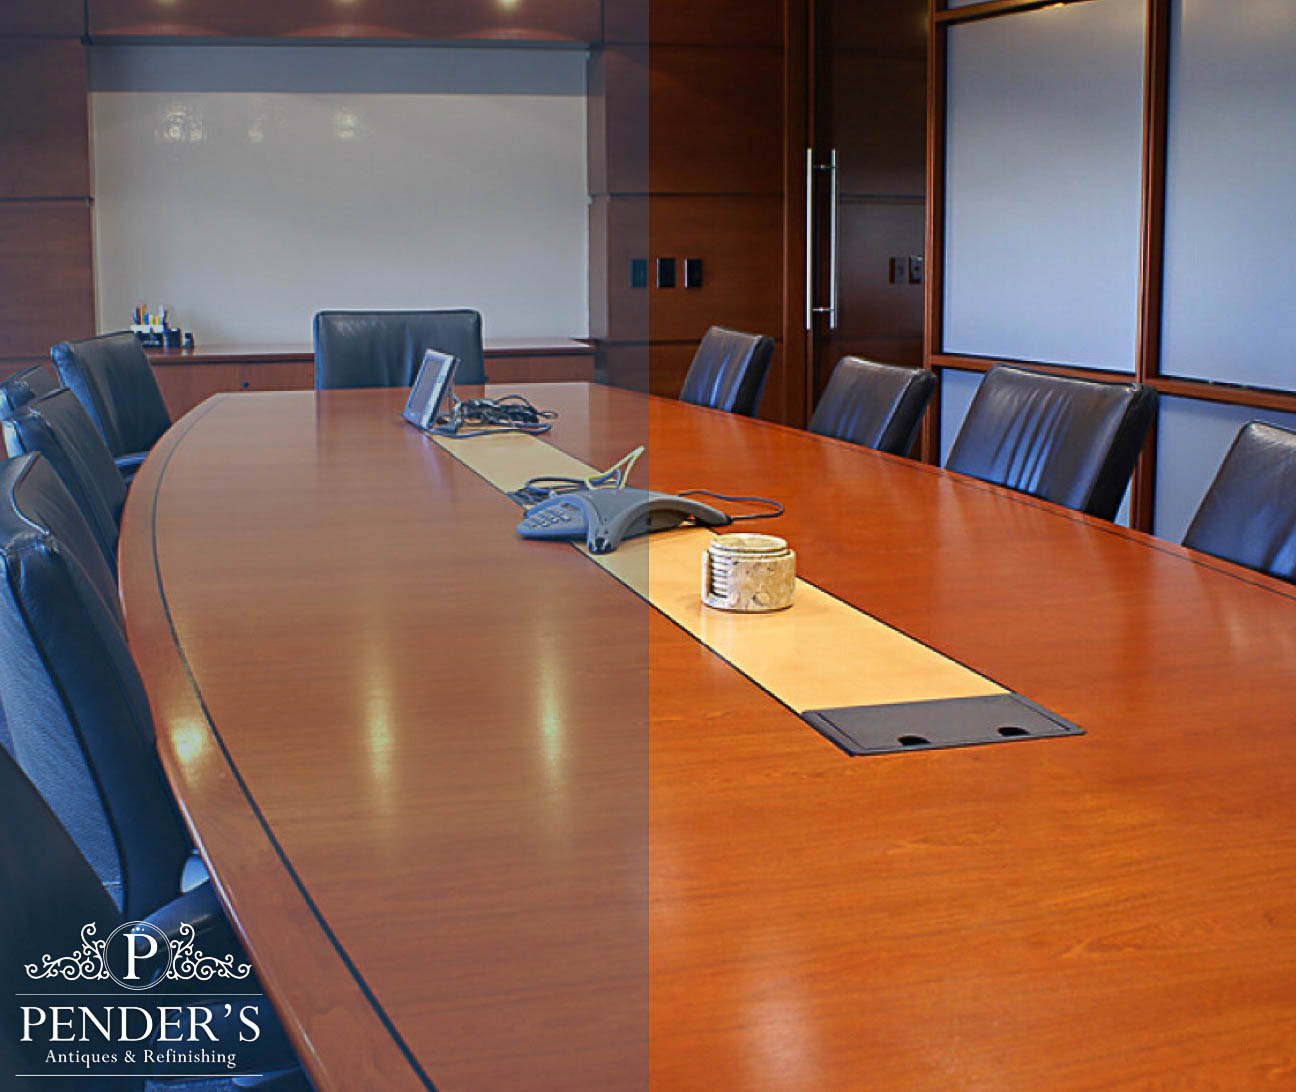 A large wooden conference table in a corporate office setting